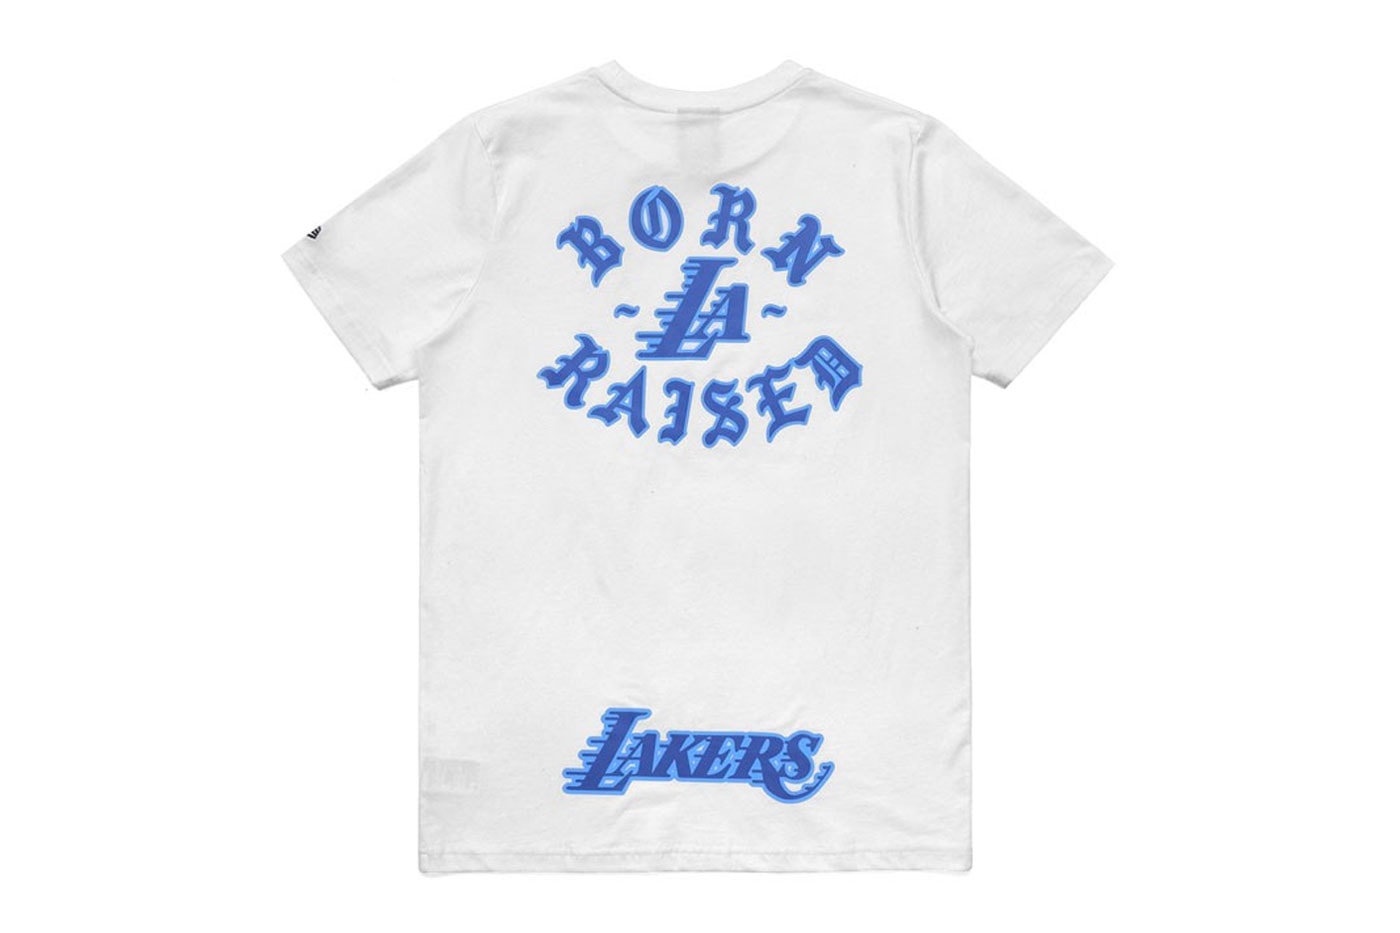 Born X Raised Taps the Los Angeles Lakers for a Celebratory Season-Opening Collection